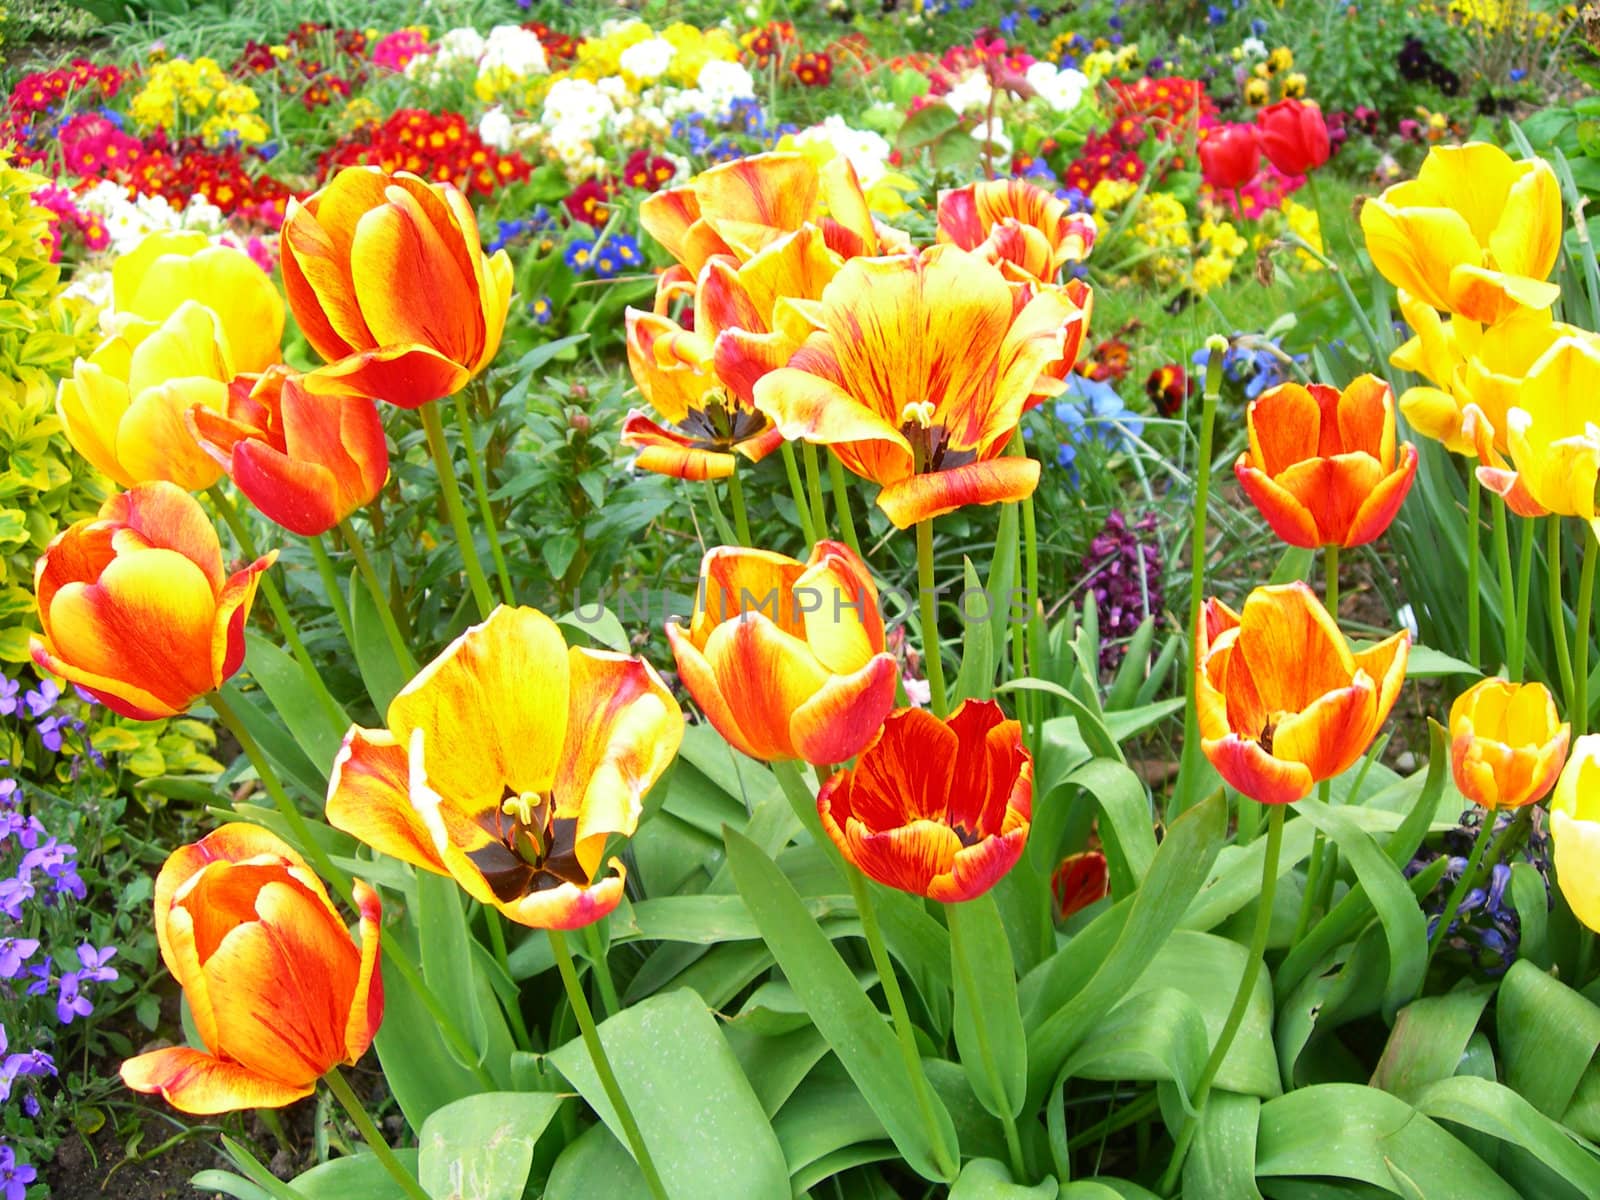 Variety of colourful spring flowers in a field.